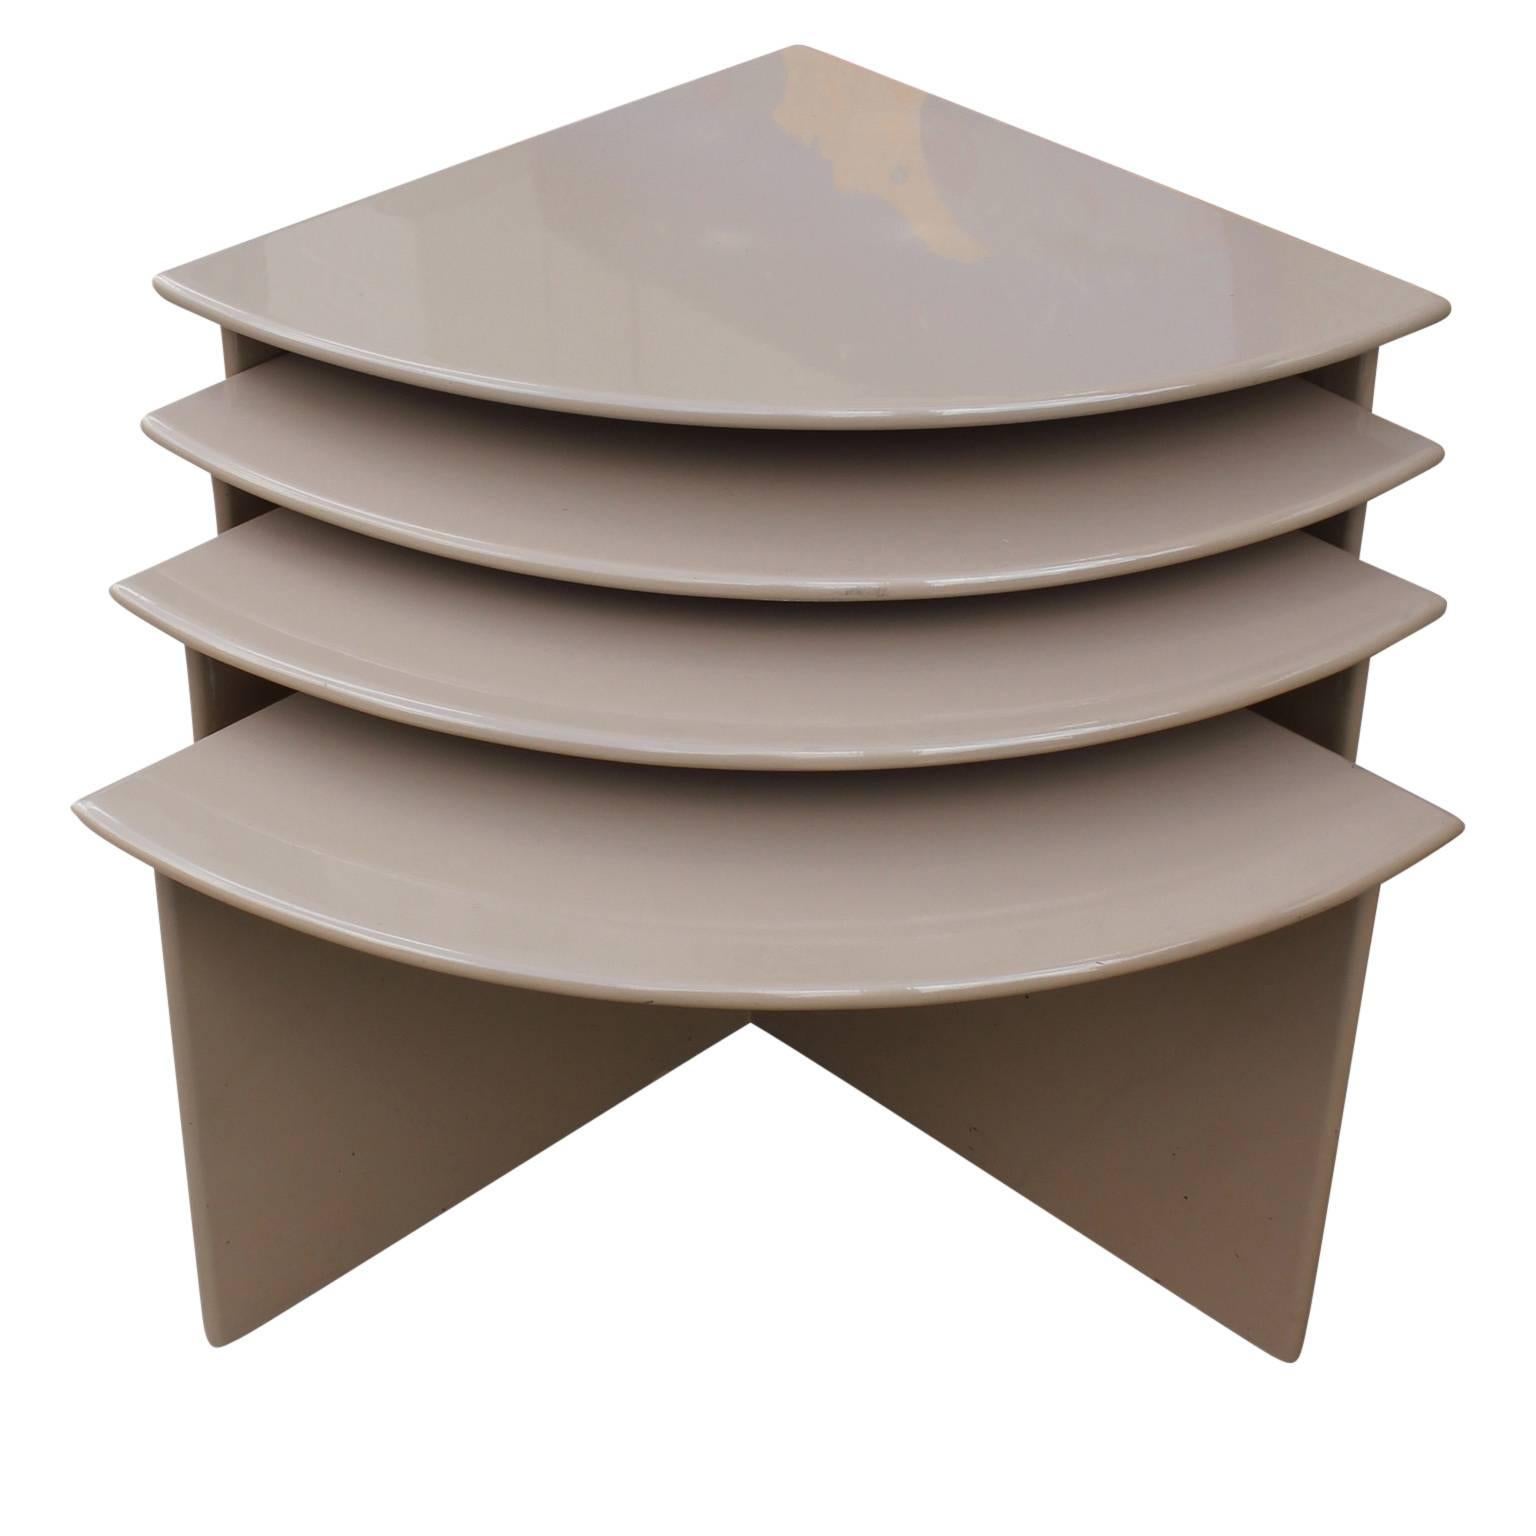 Set of Four Nude Modern Lacquer Nesting / Stacking Tables